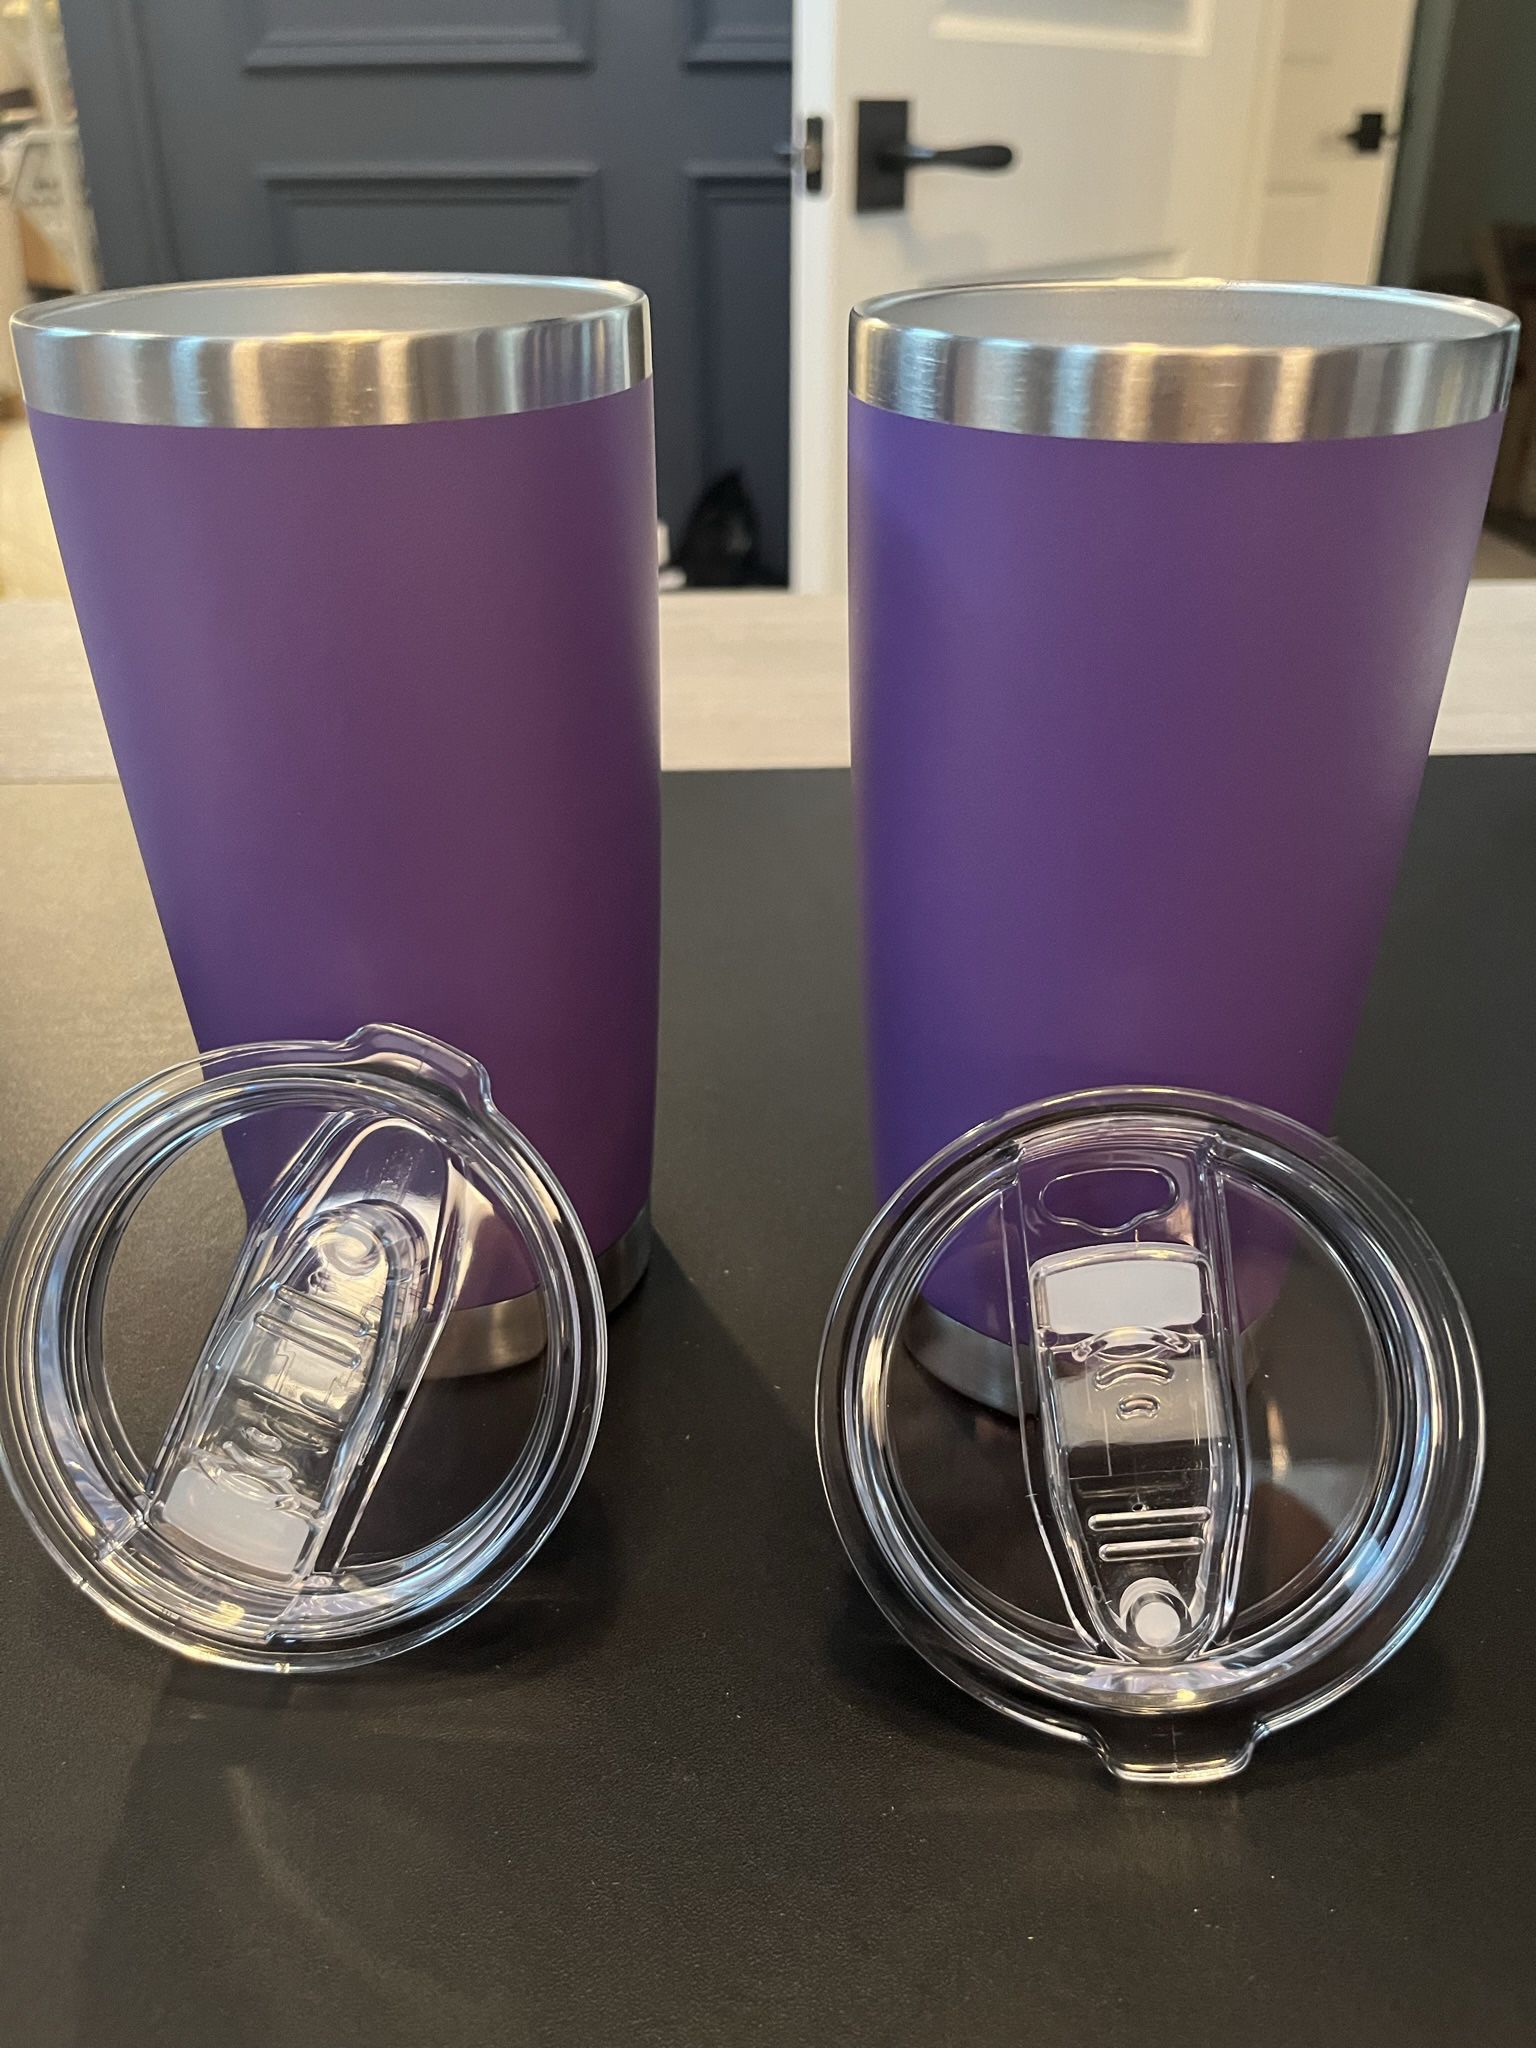 20 Total - Purple 20oz tumblers With Lid - Brand New All 20 - $3.75 Each